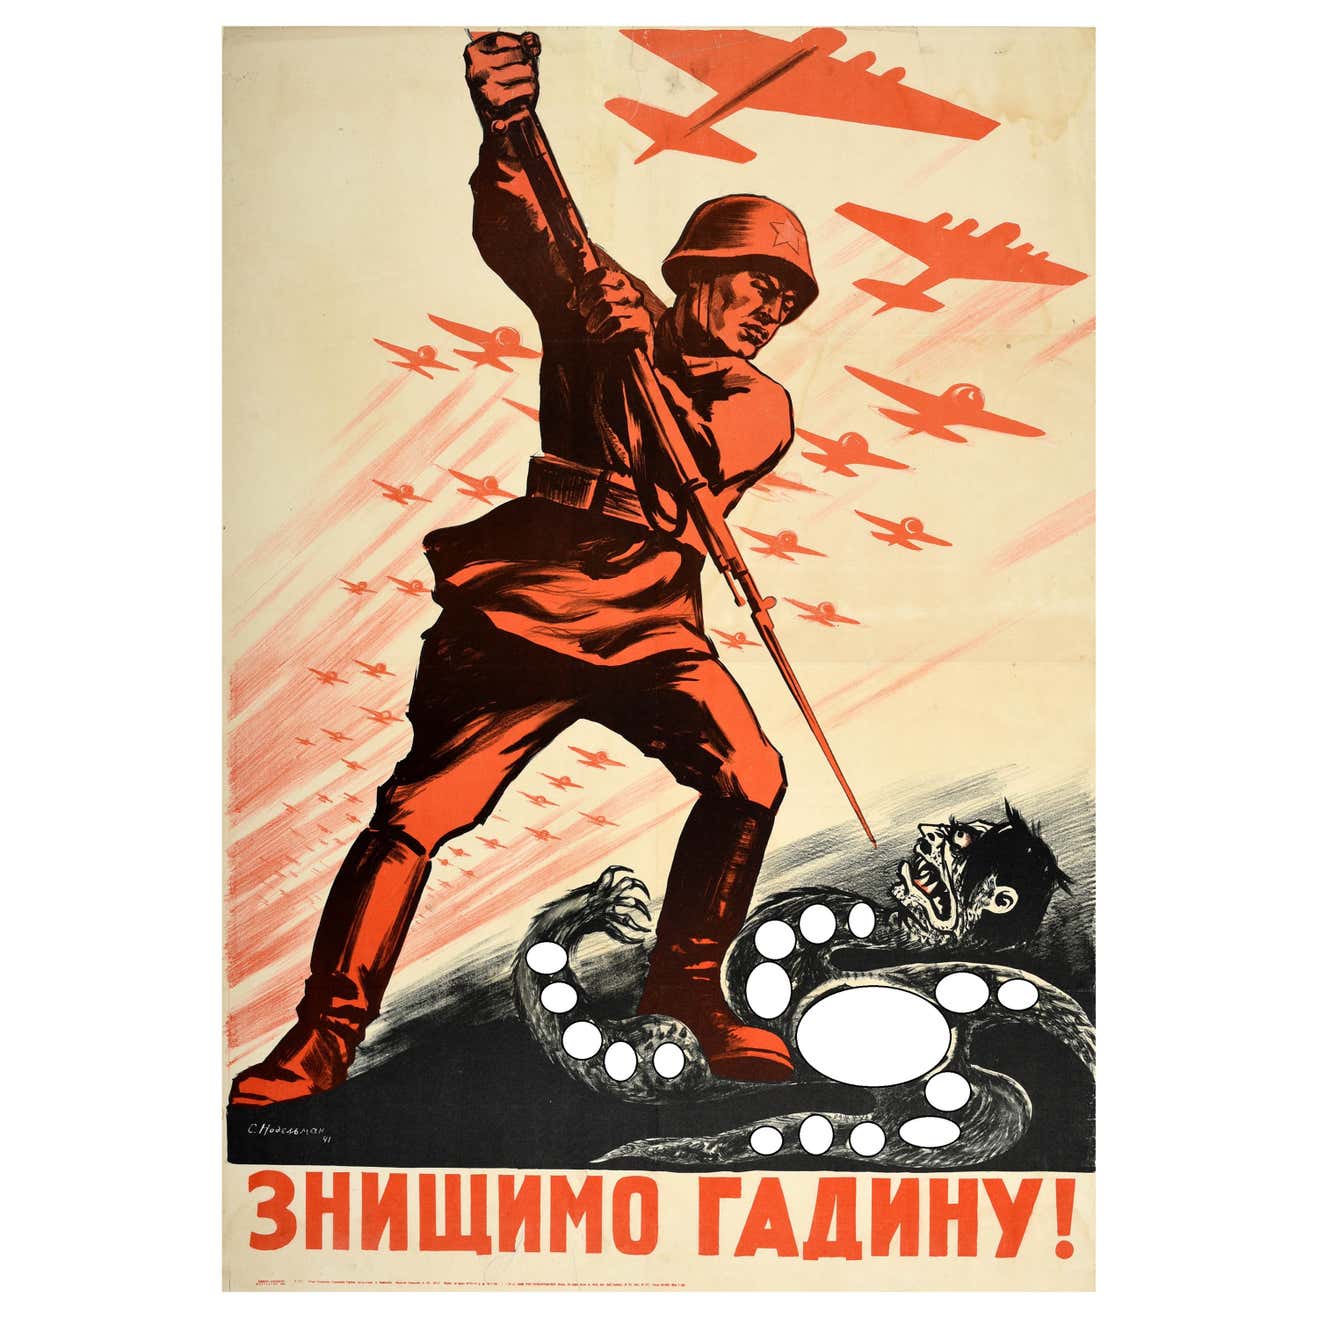 Original Vintage WWII Poster Destroy The Nazi Reptile USSR Red Army ...